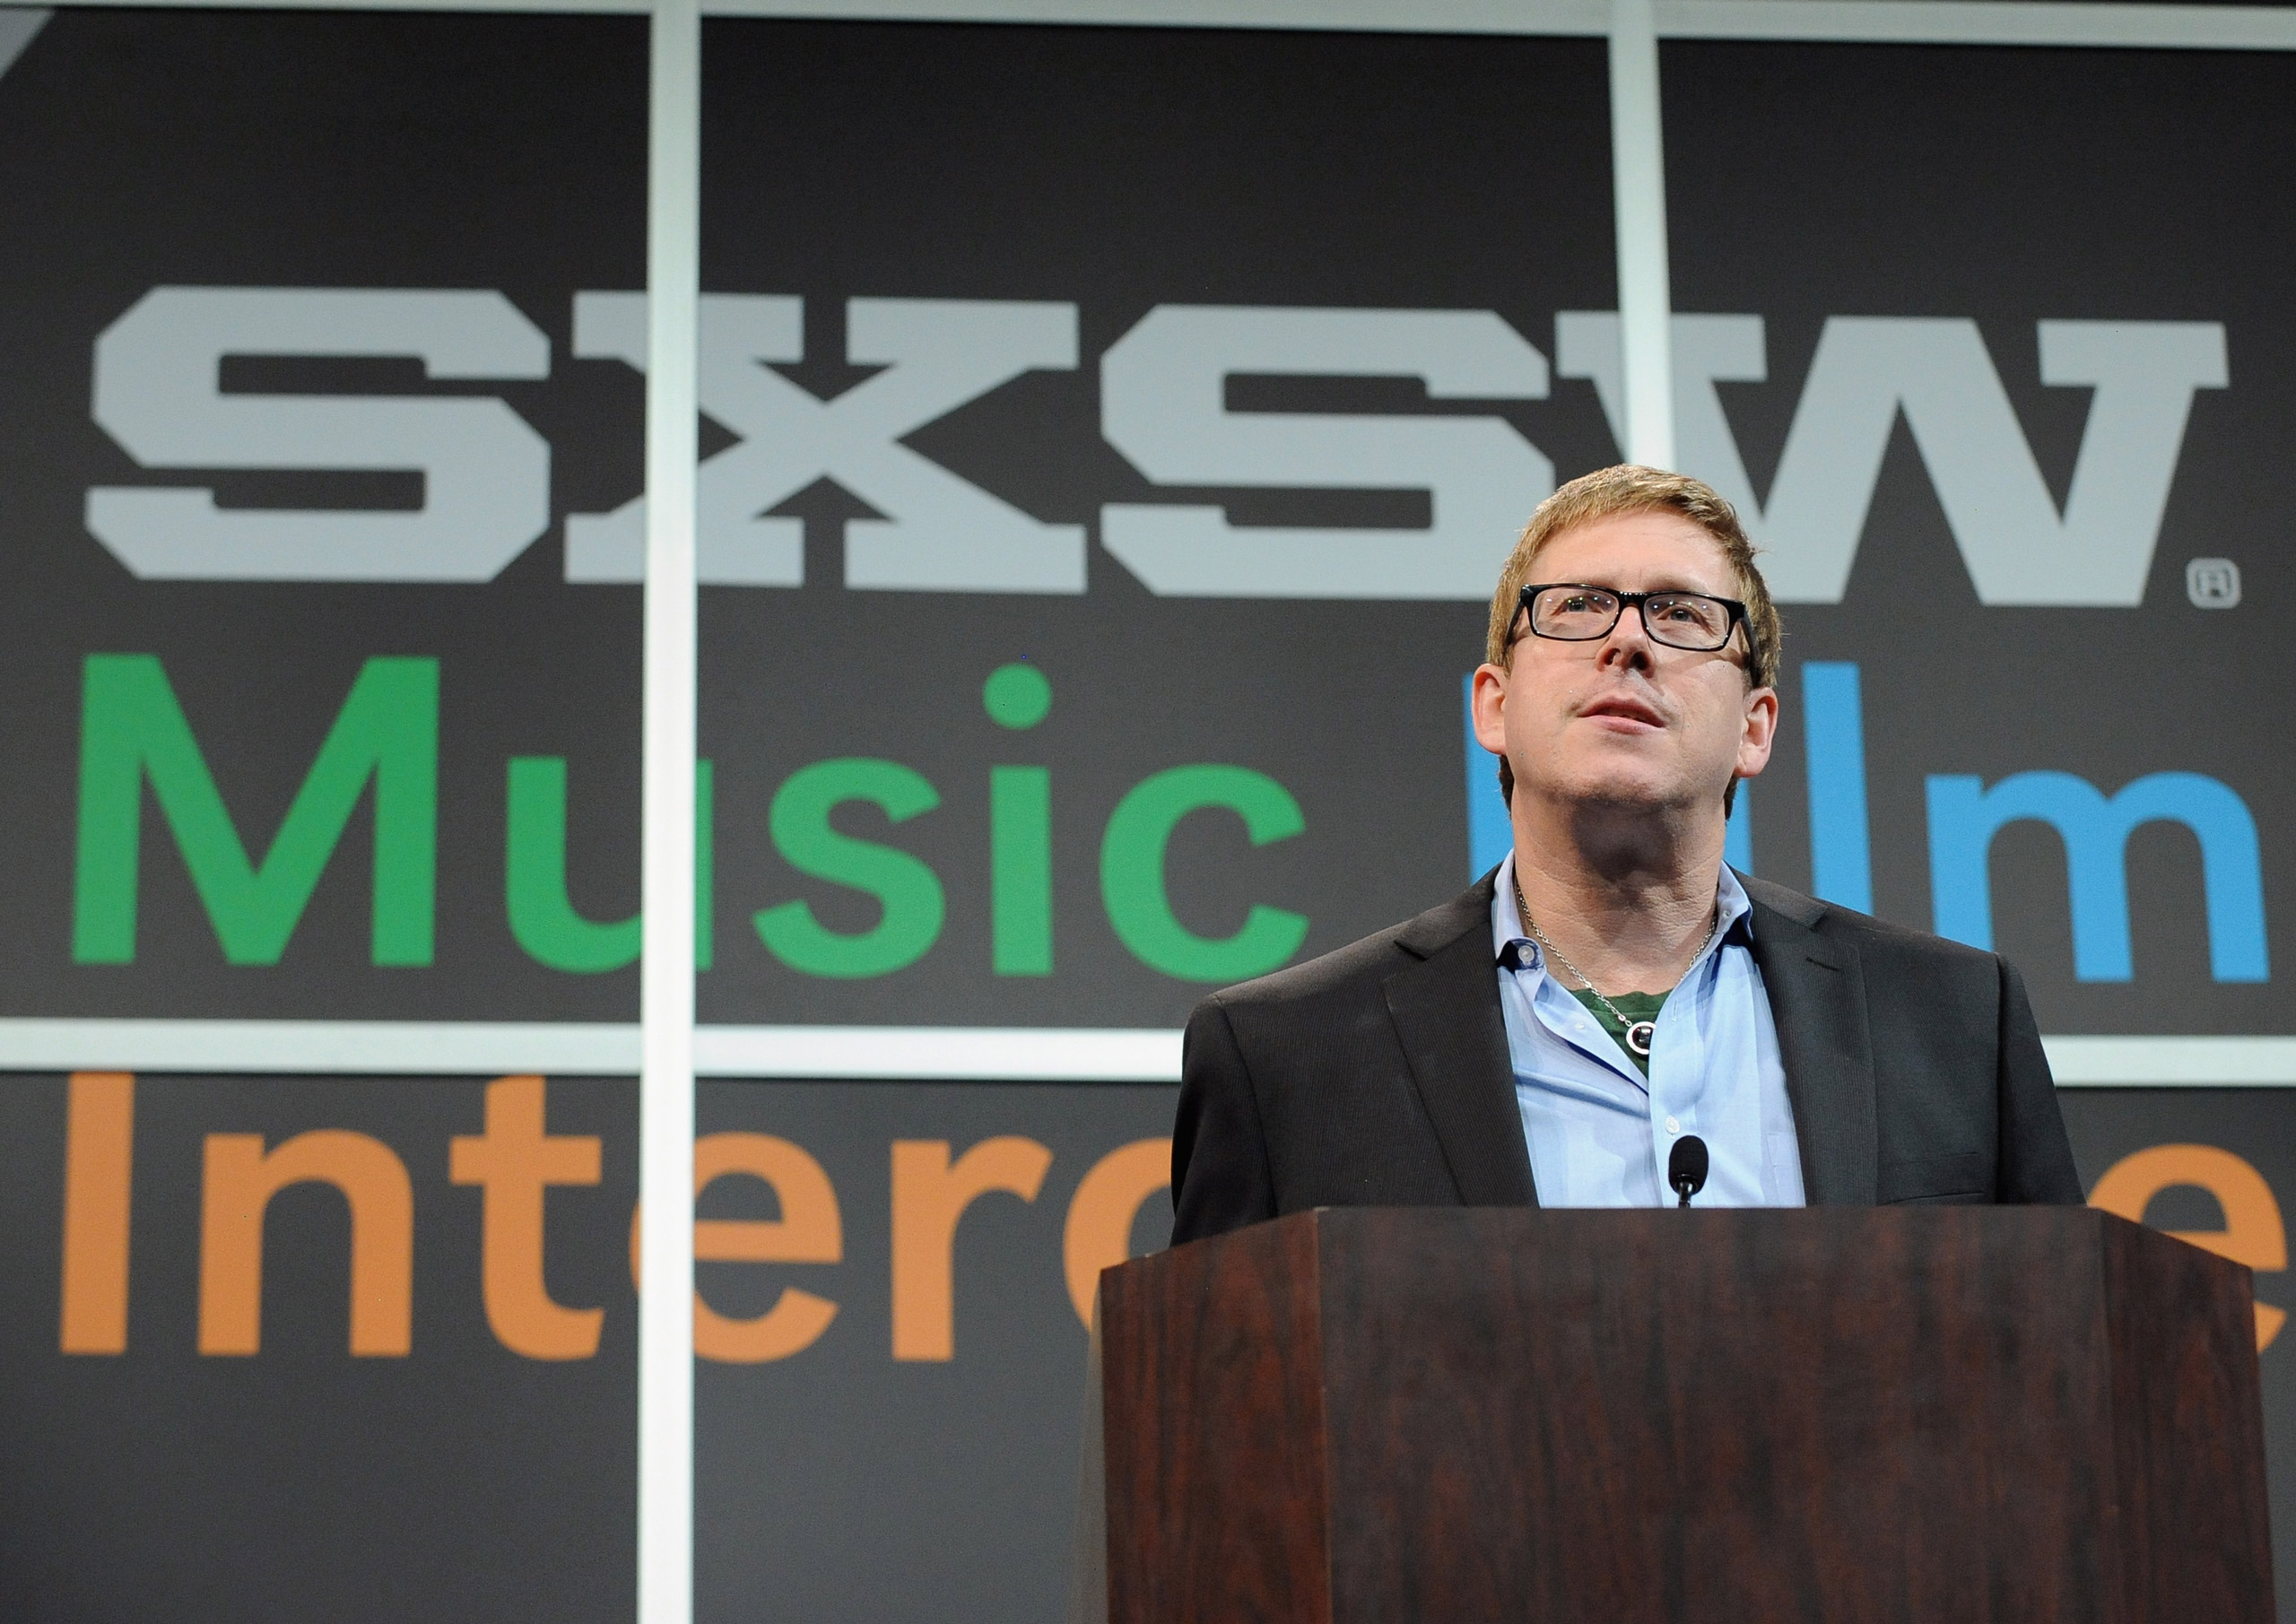 Hugh Forrest, SXSW Interactive's Director speaks onstage at Bruce Sterling Closing Remarks during the 2014 SXSW Music, Film + Interactive Festival in Austin on March 11, 2014. (Jon Shapley—Getty Images for SXSW)